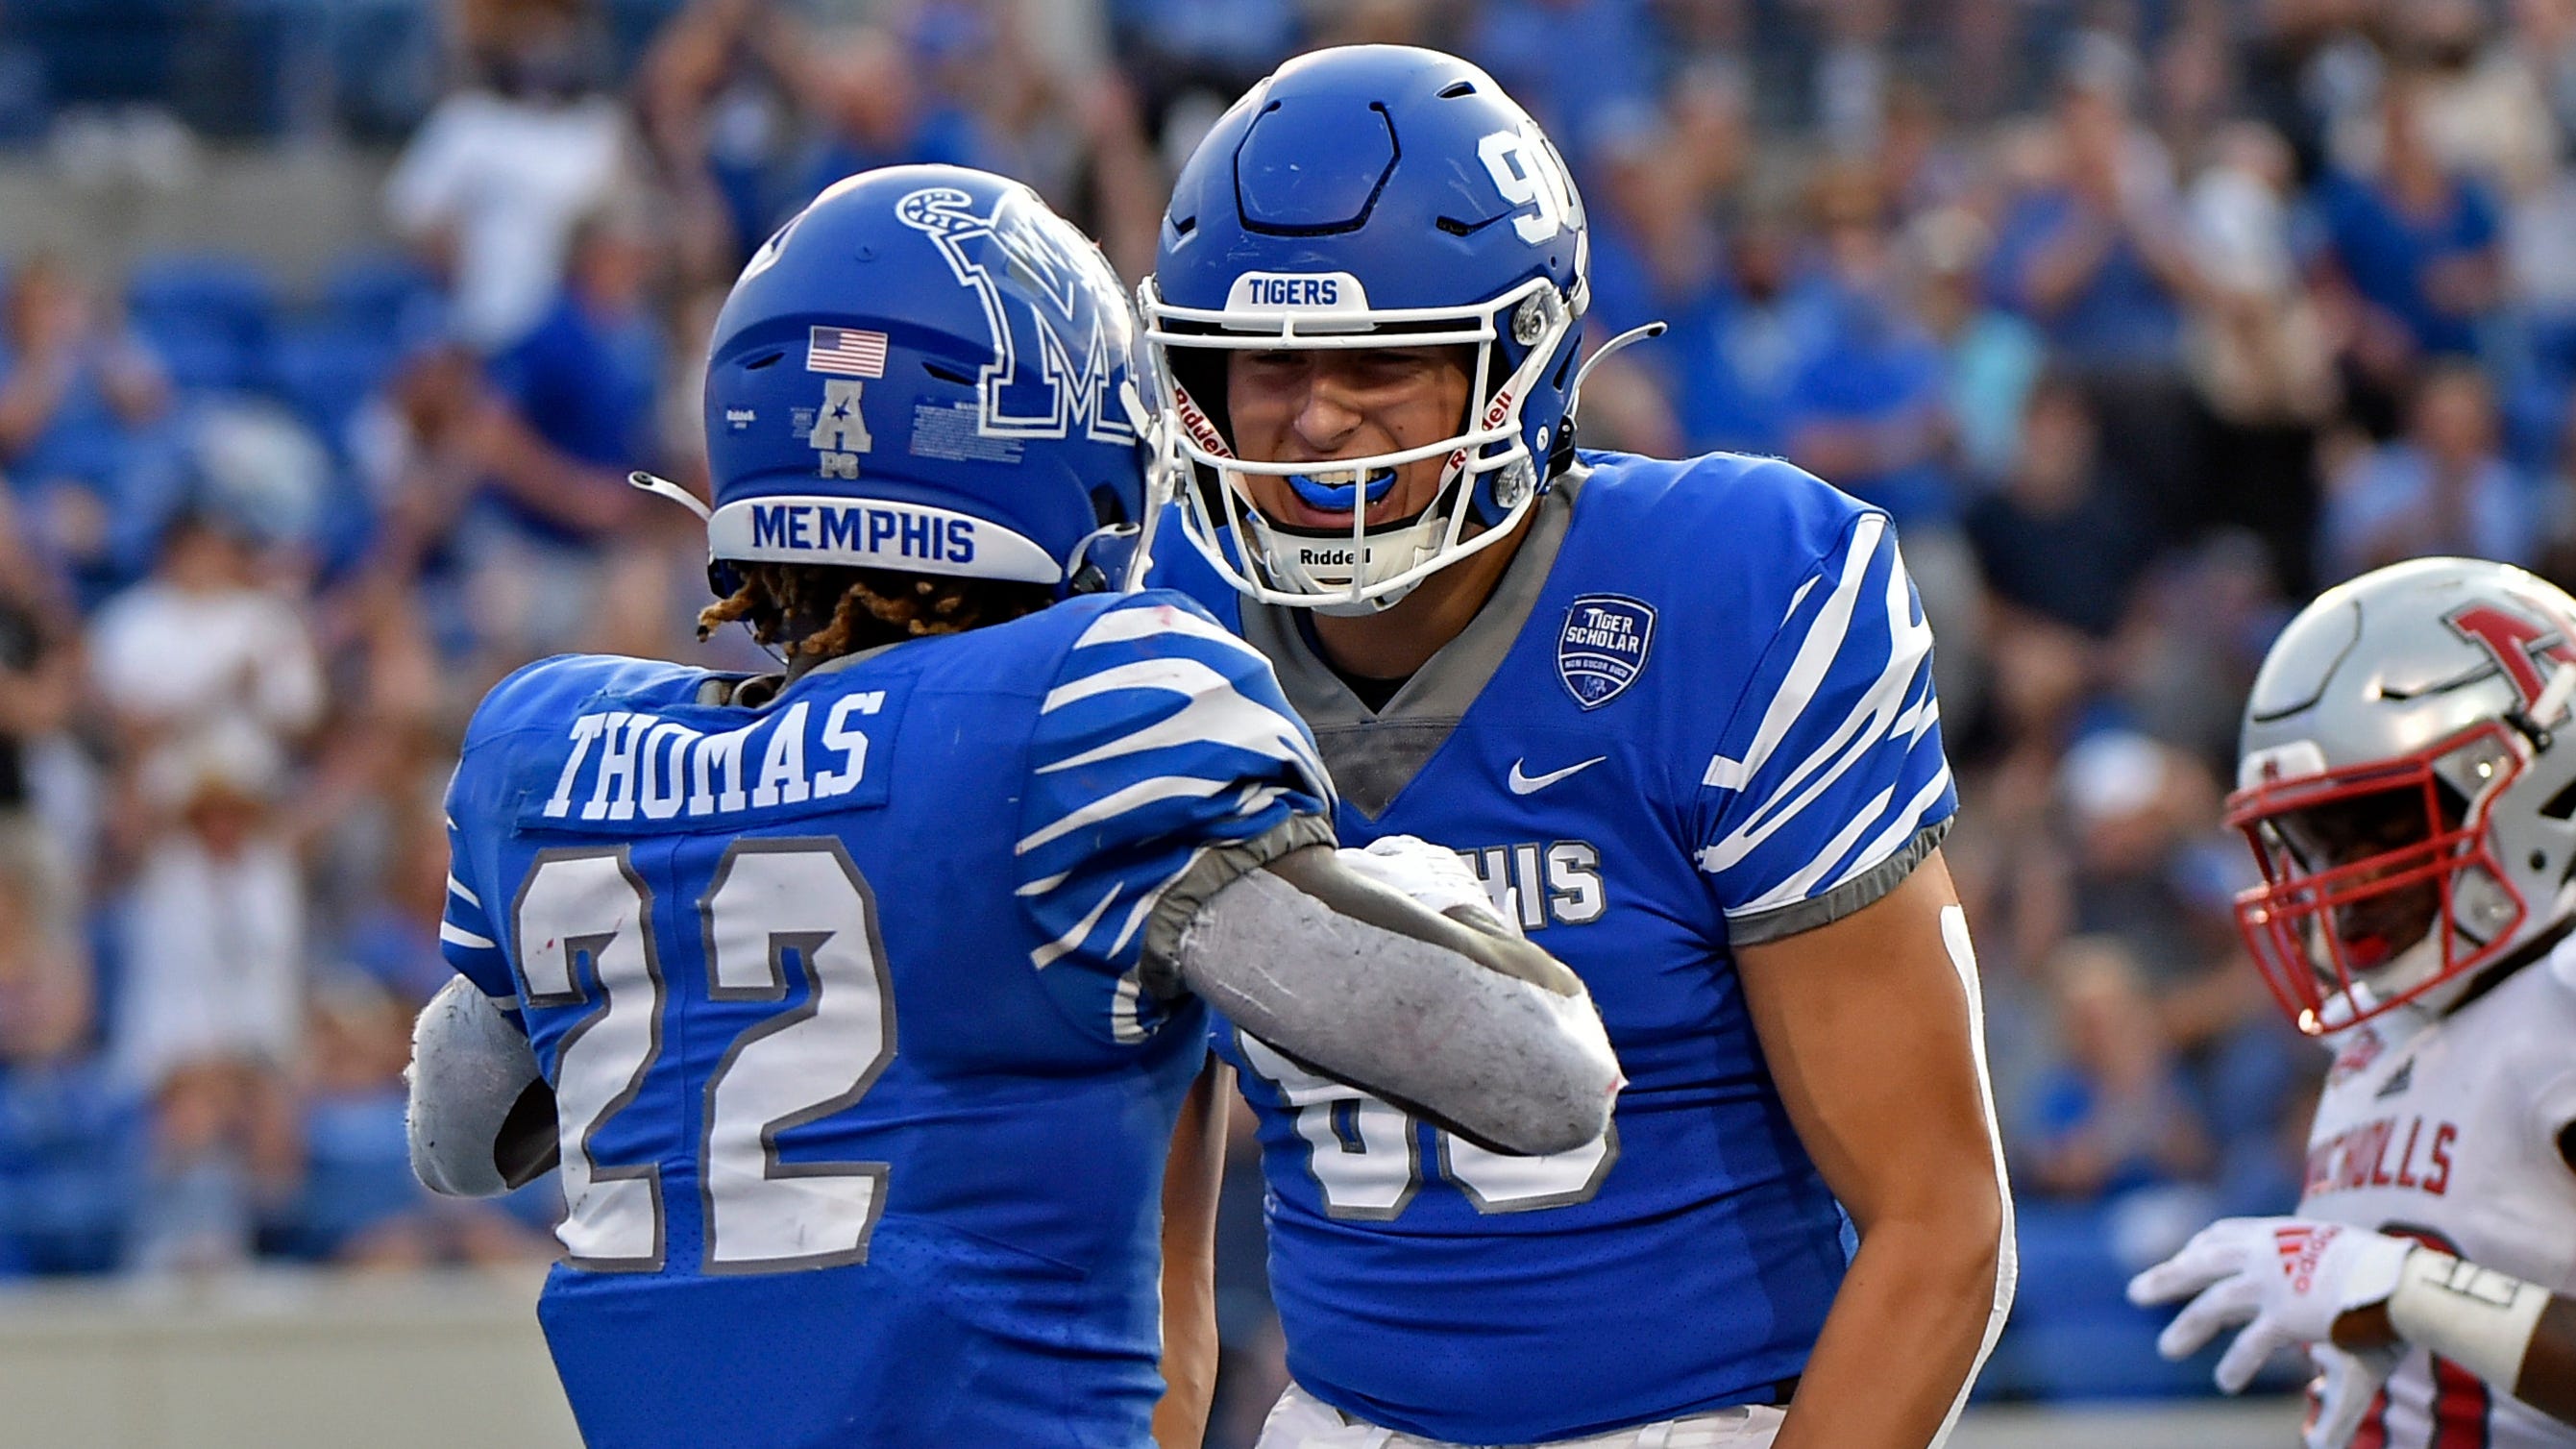 How to watch Memphis vs. Mississippi State football on TV, live stream